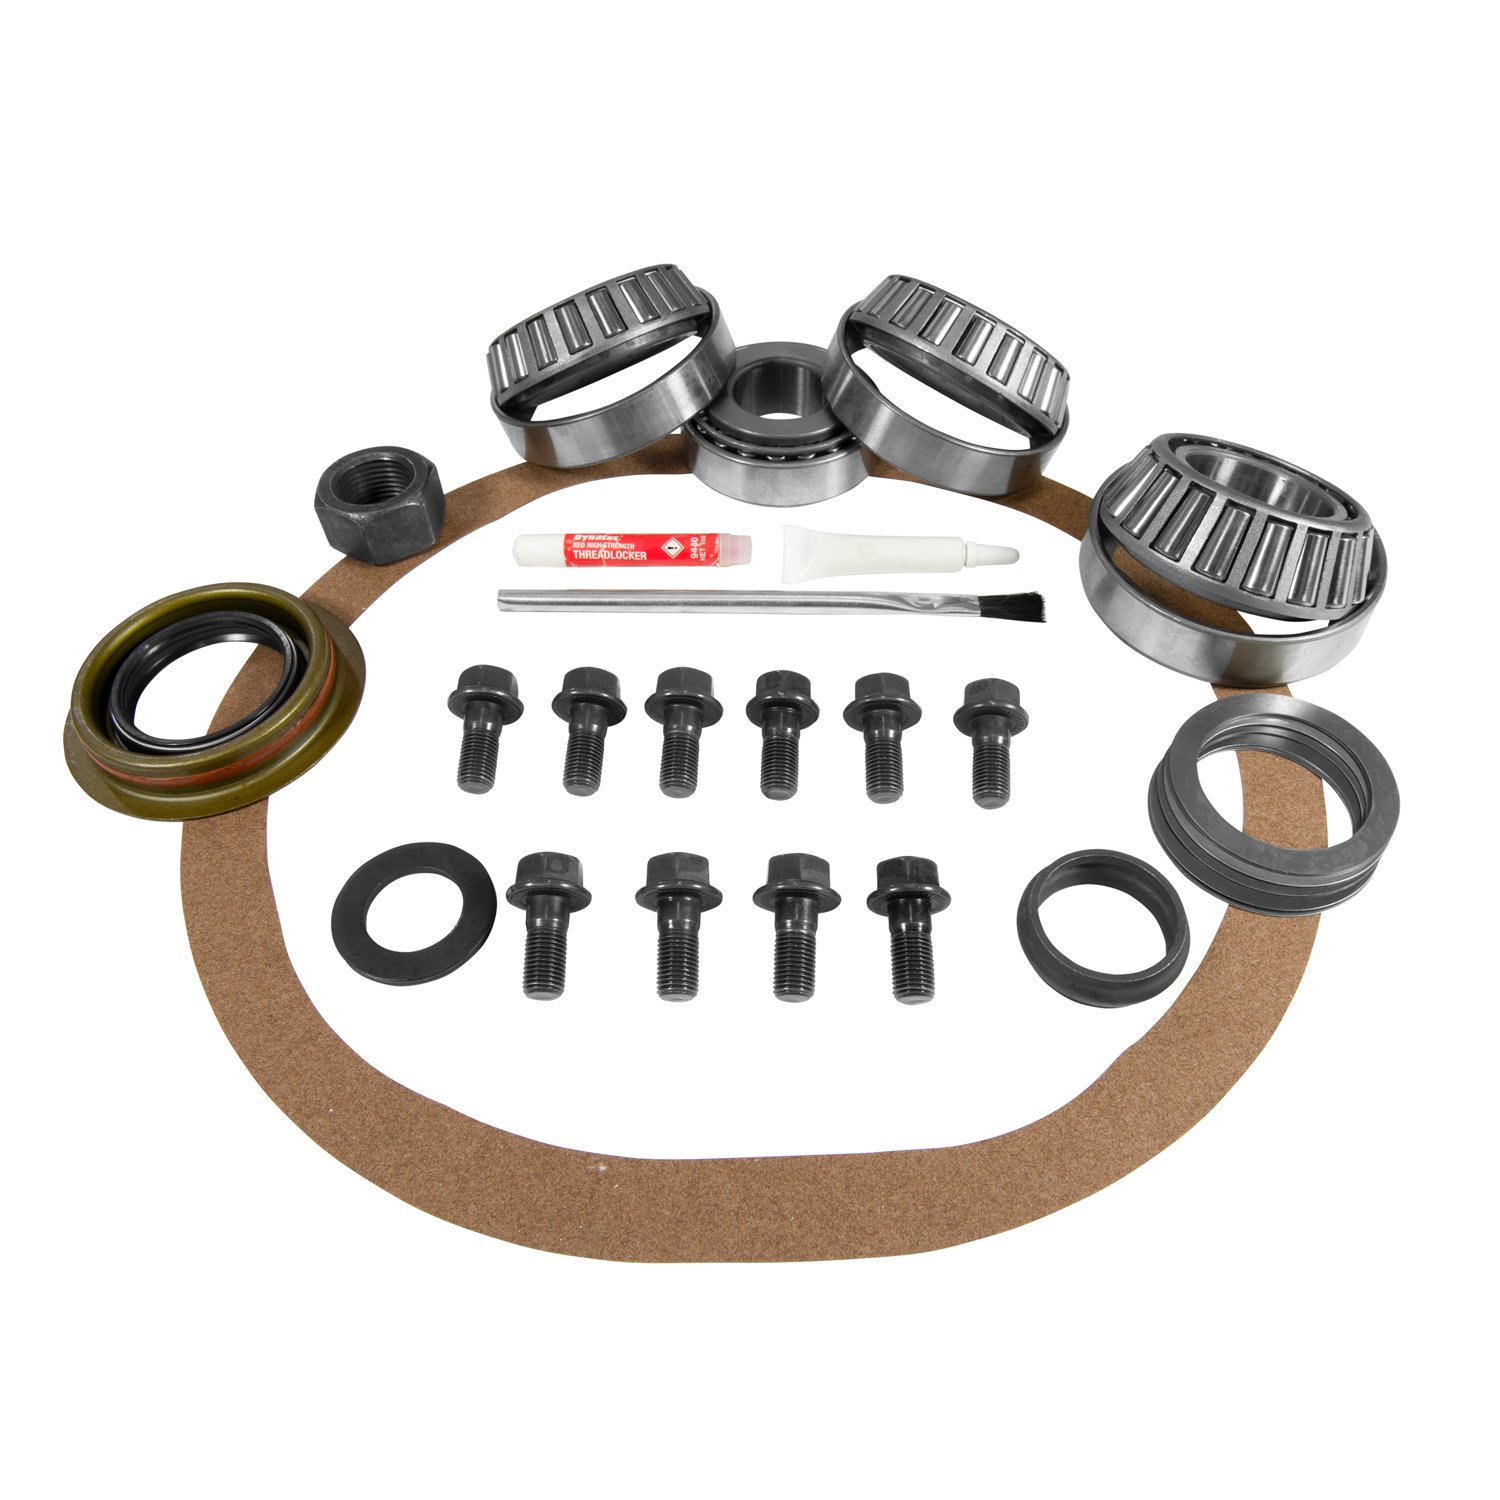 USA Standard ZK C8.75-A Master Overhaul Kit, For Chrysler 8.75 in. #41 Housing With Lm104912/49 Carrier Brg